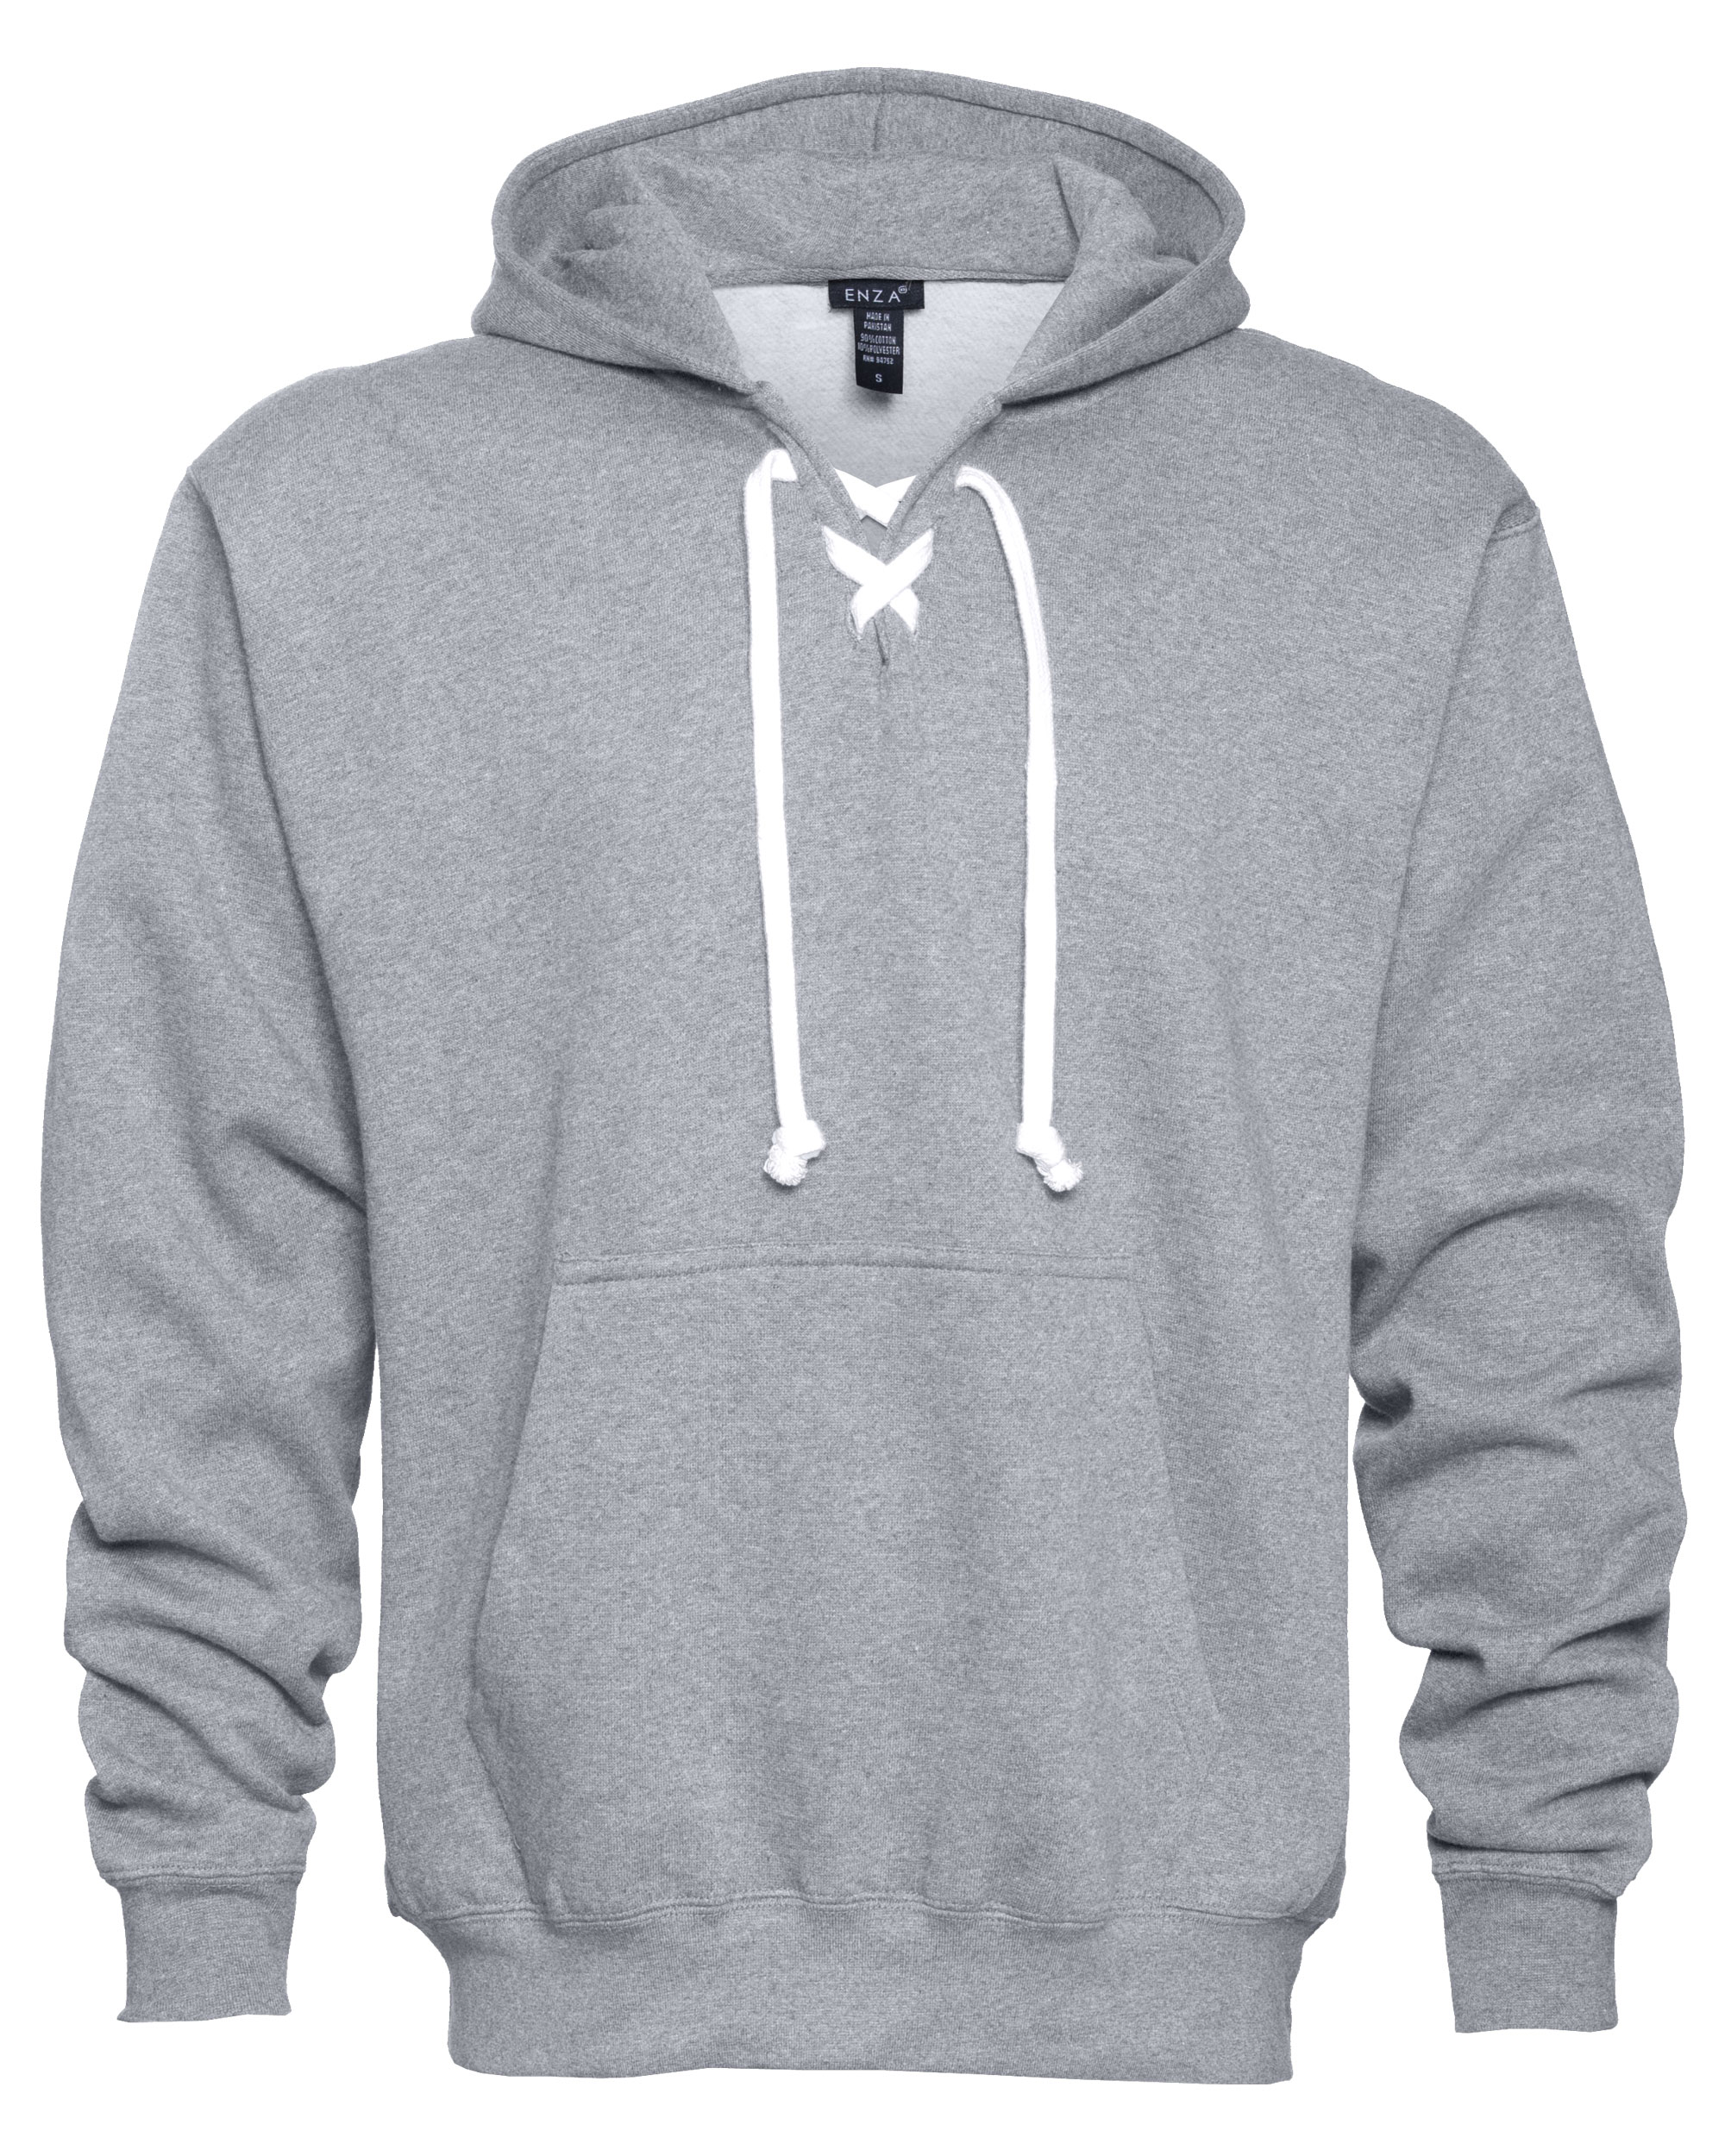 Enza® 35979 Adult Hockey Pullover Hood, shown in Athletic Heather